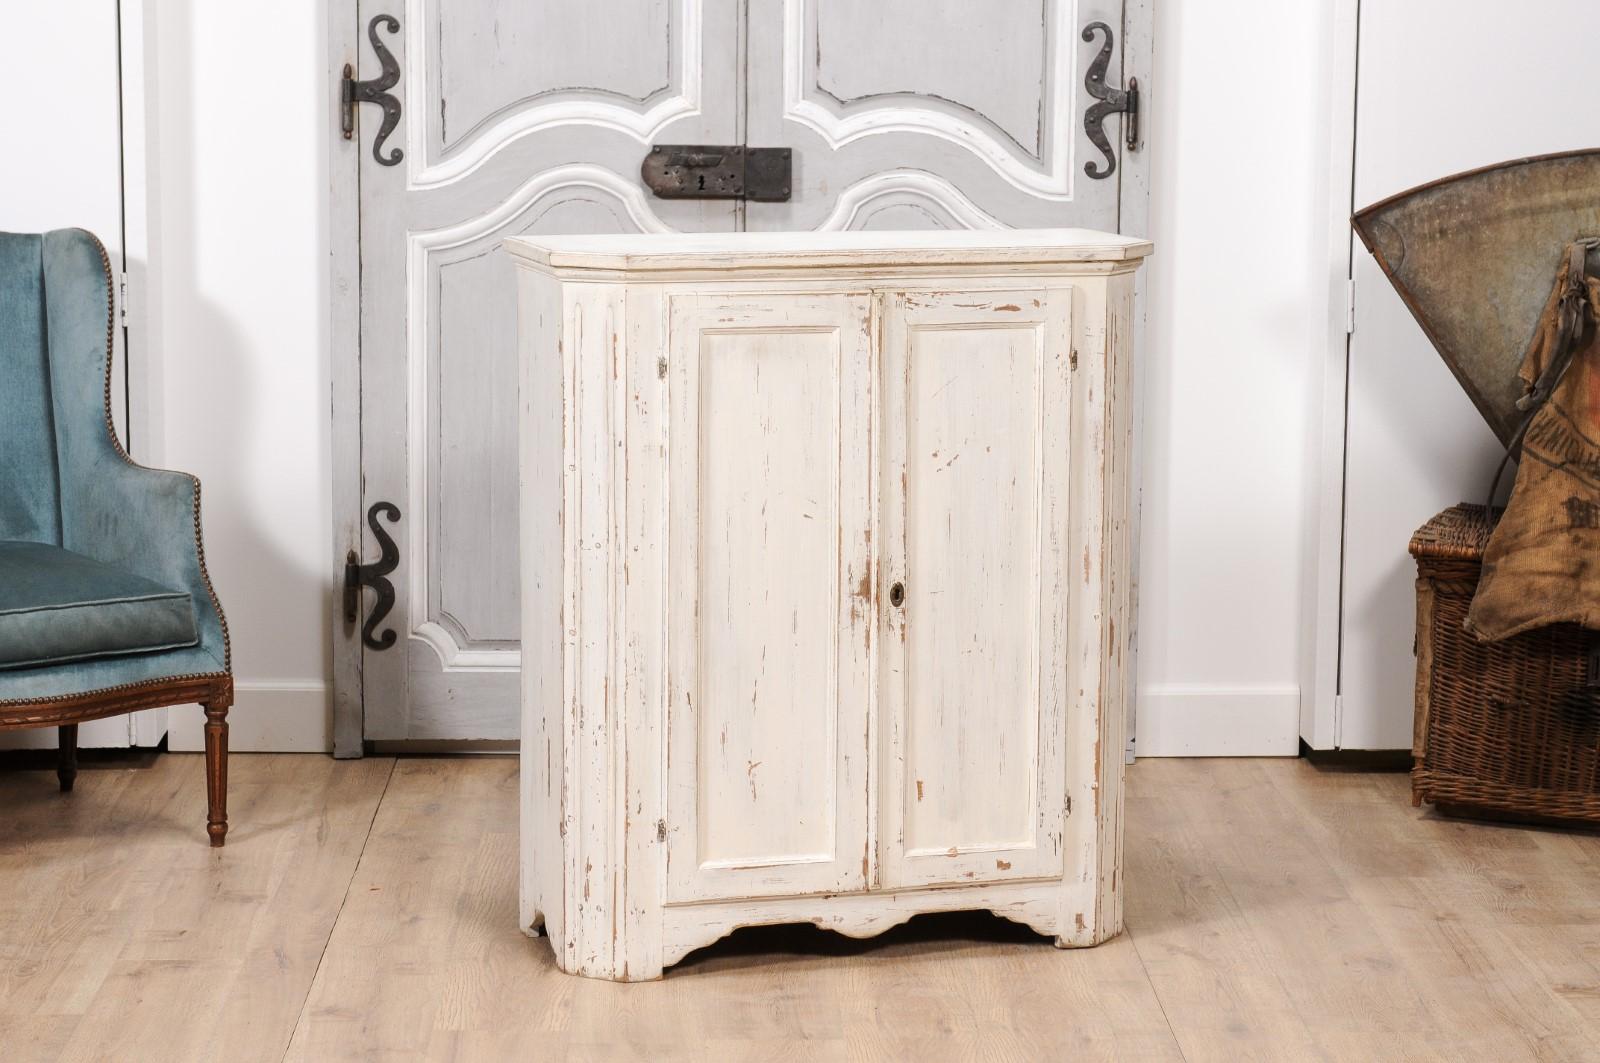 A Swedish off-white painted sideboard from circa 1830 with carved apron and distressed finish. This charming Swedish sideboard from circa 1830 is a study in grace and simplicity, with its inviting off-white painted finish highlighting a thoughtful